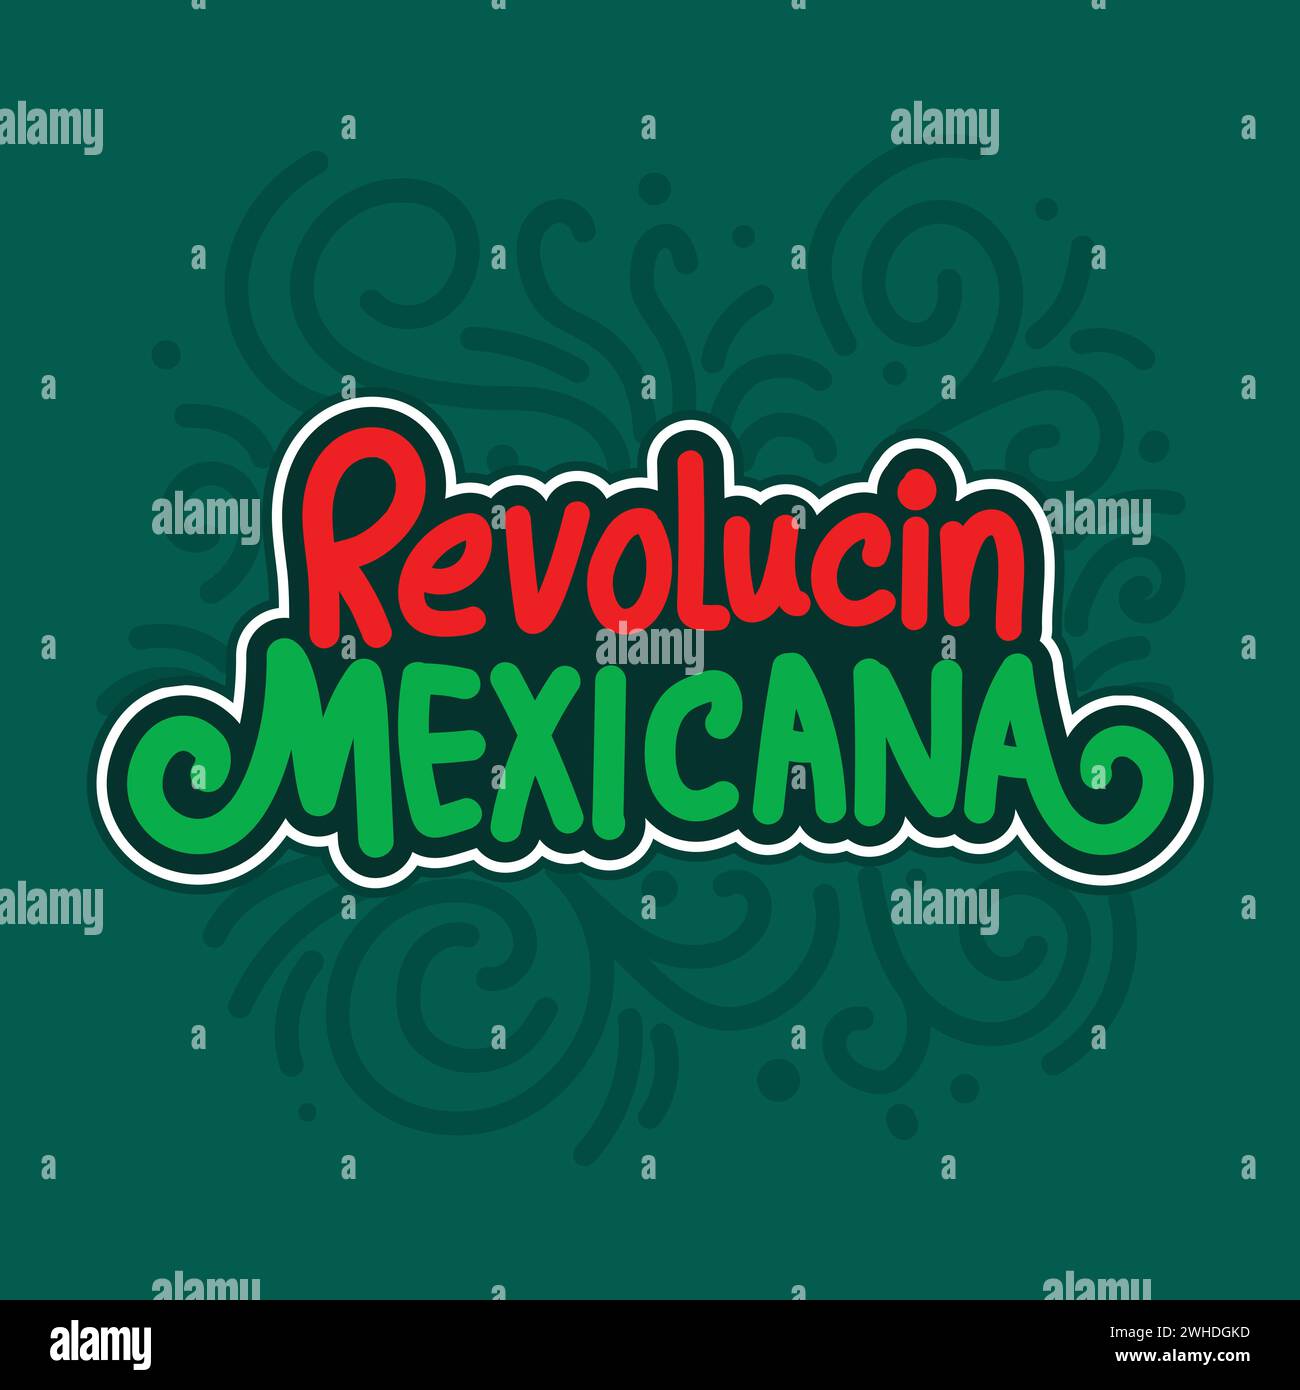 Revolucion Mexicana banner template with typogrphy to celebrate Traditional Mexican Holiday November 20.  Mexican Revolution Spanish text, vector Stock Vector